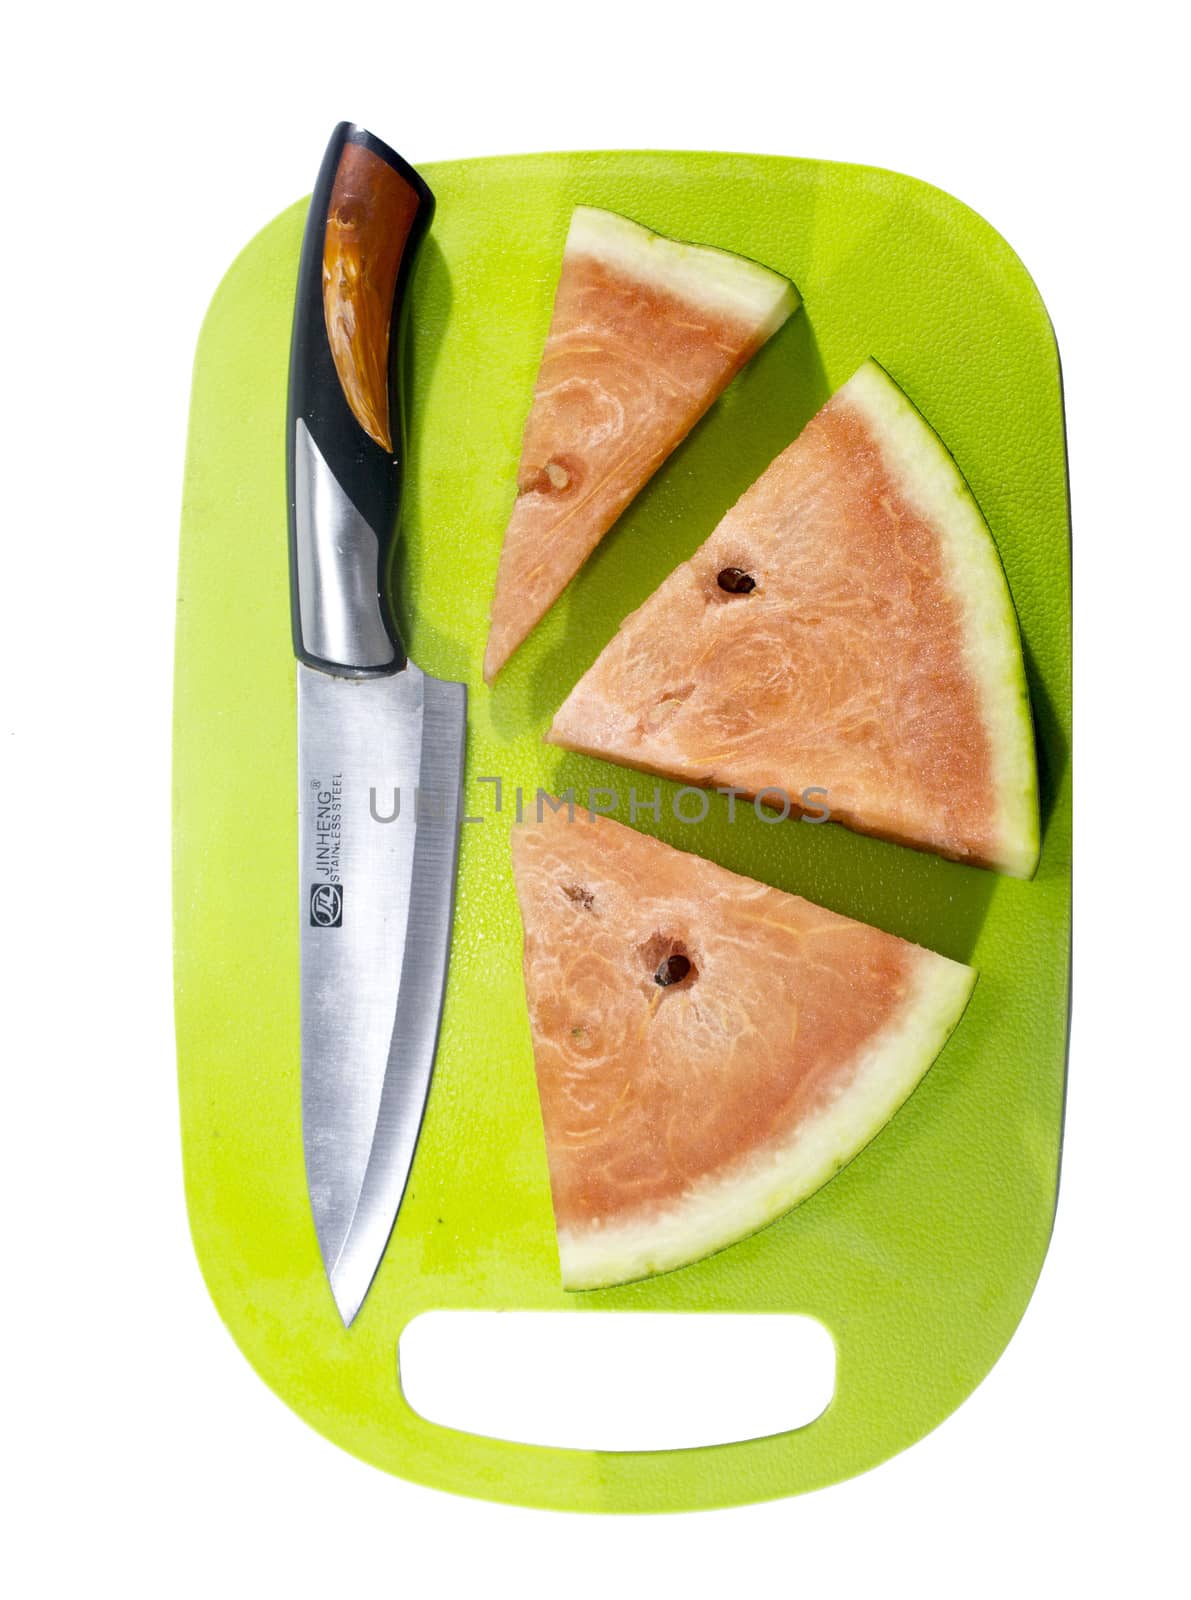 Slices of watermelon on green plastic board with knife.